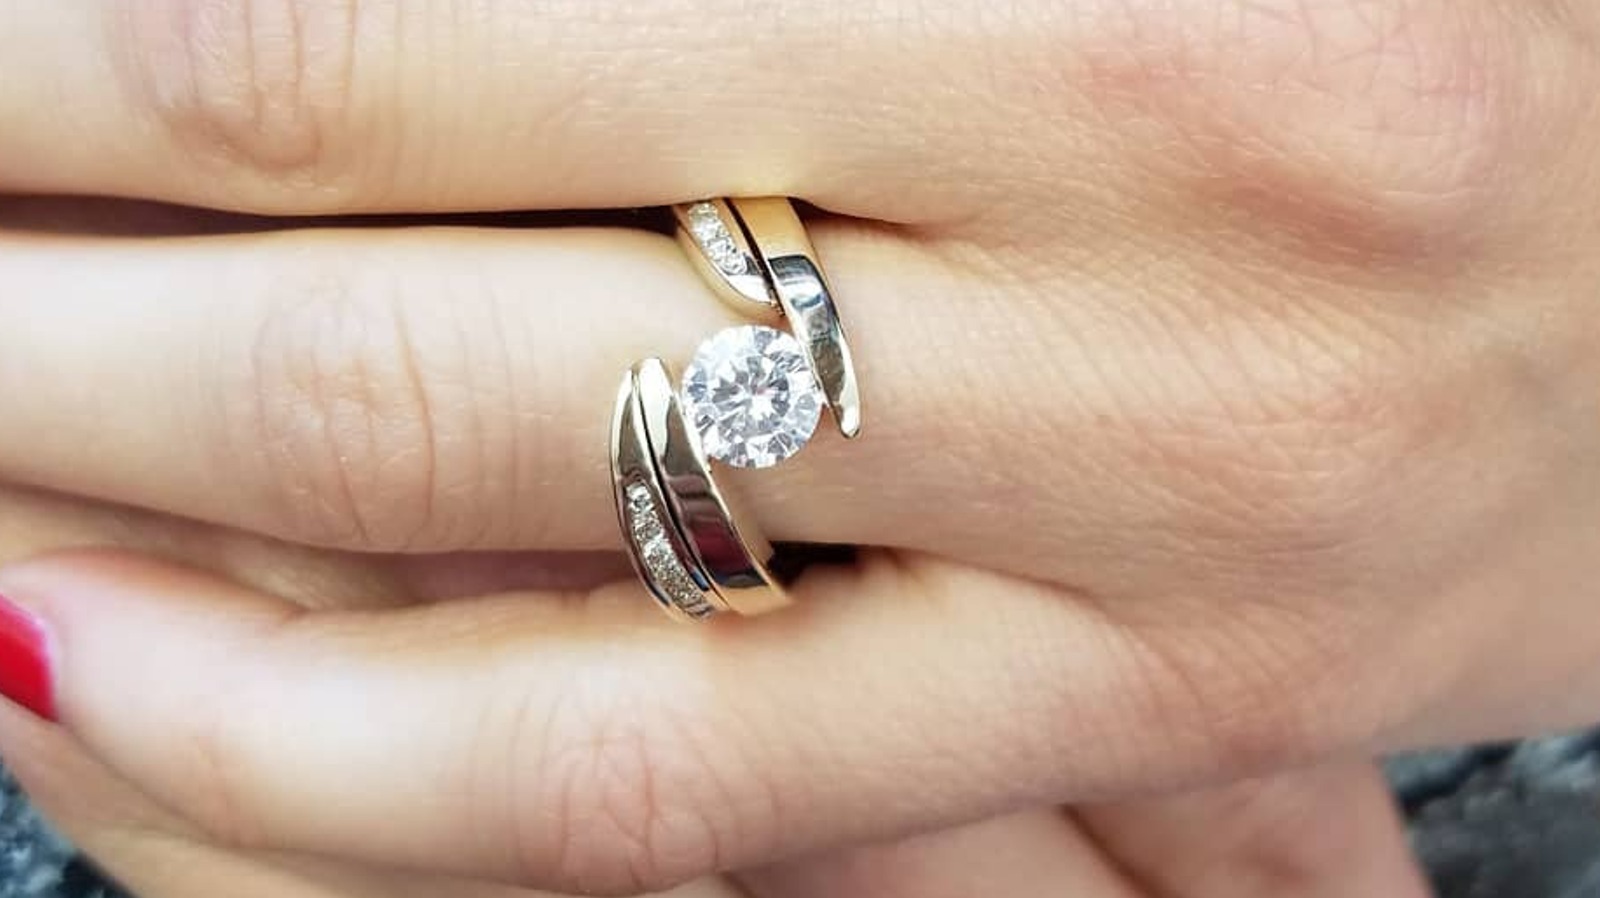 Tension Settings Are The Engagement Ring Trend You Should Avoid At All Costs – Here’s Why